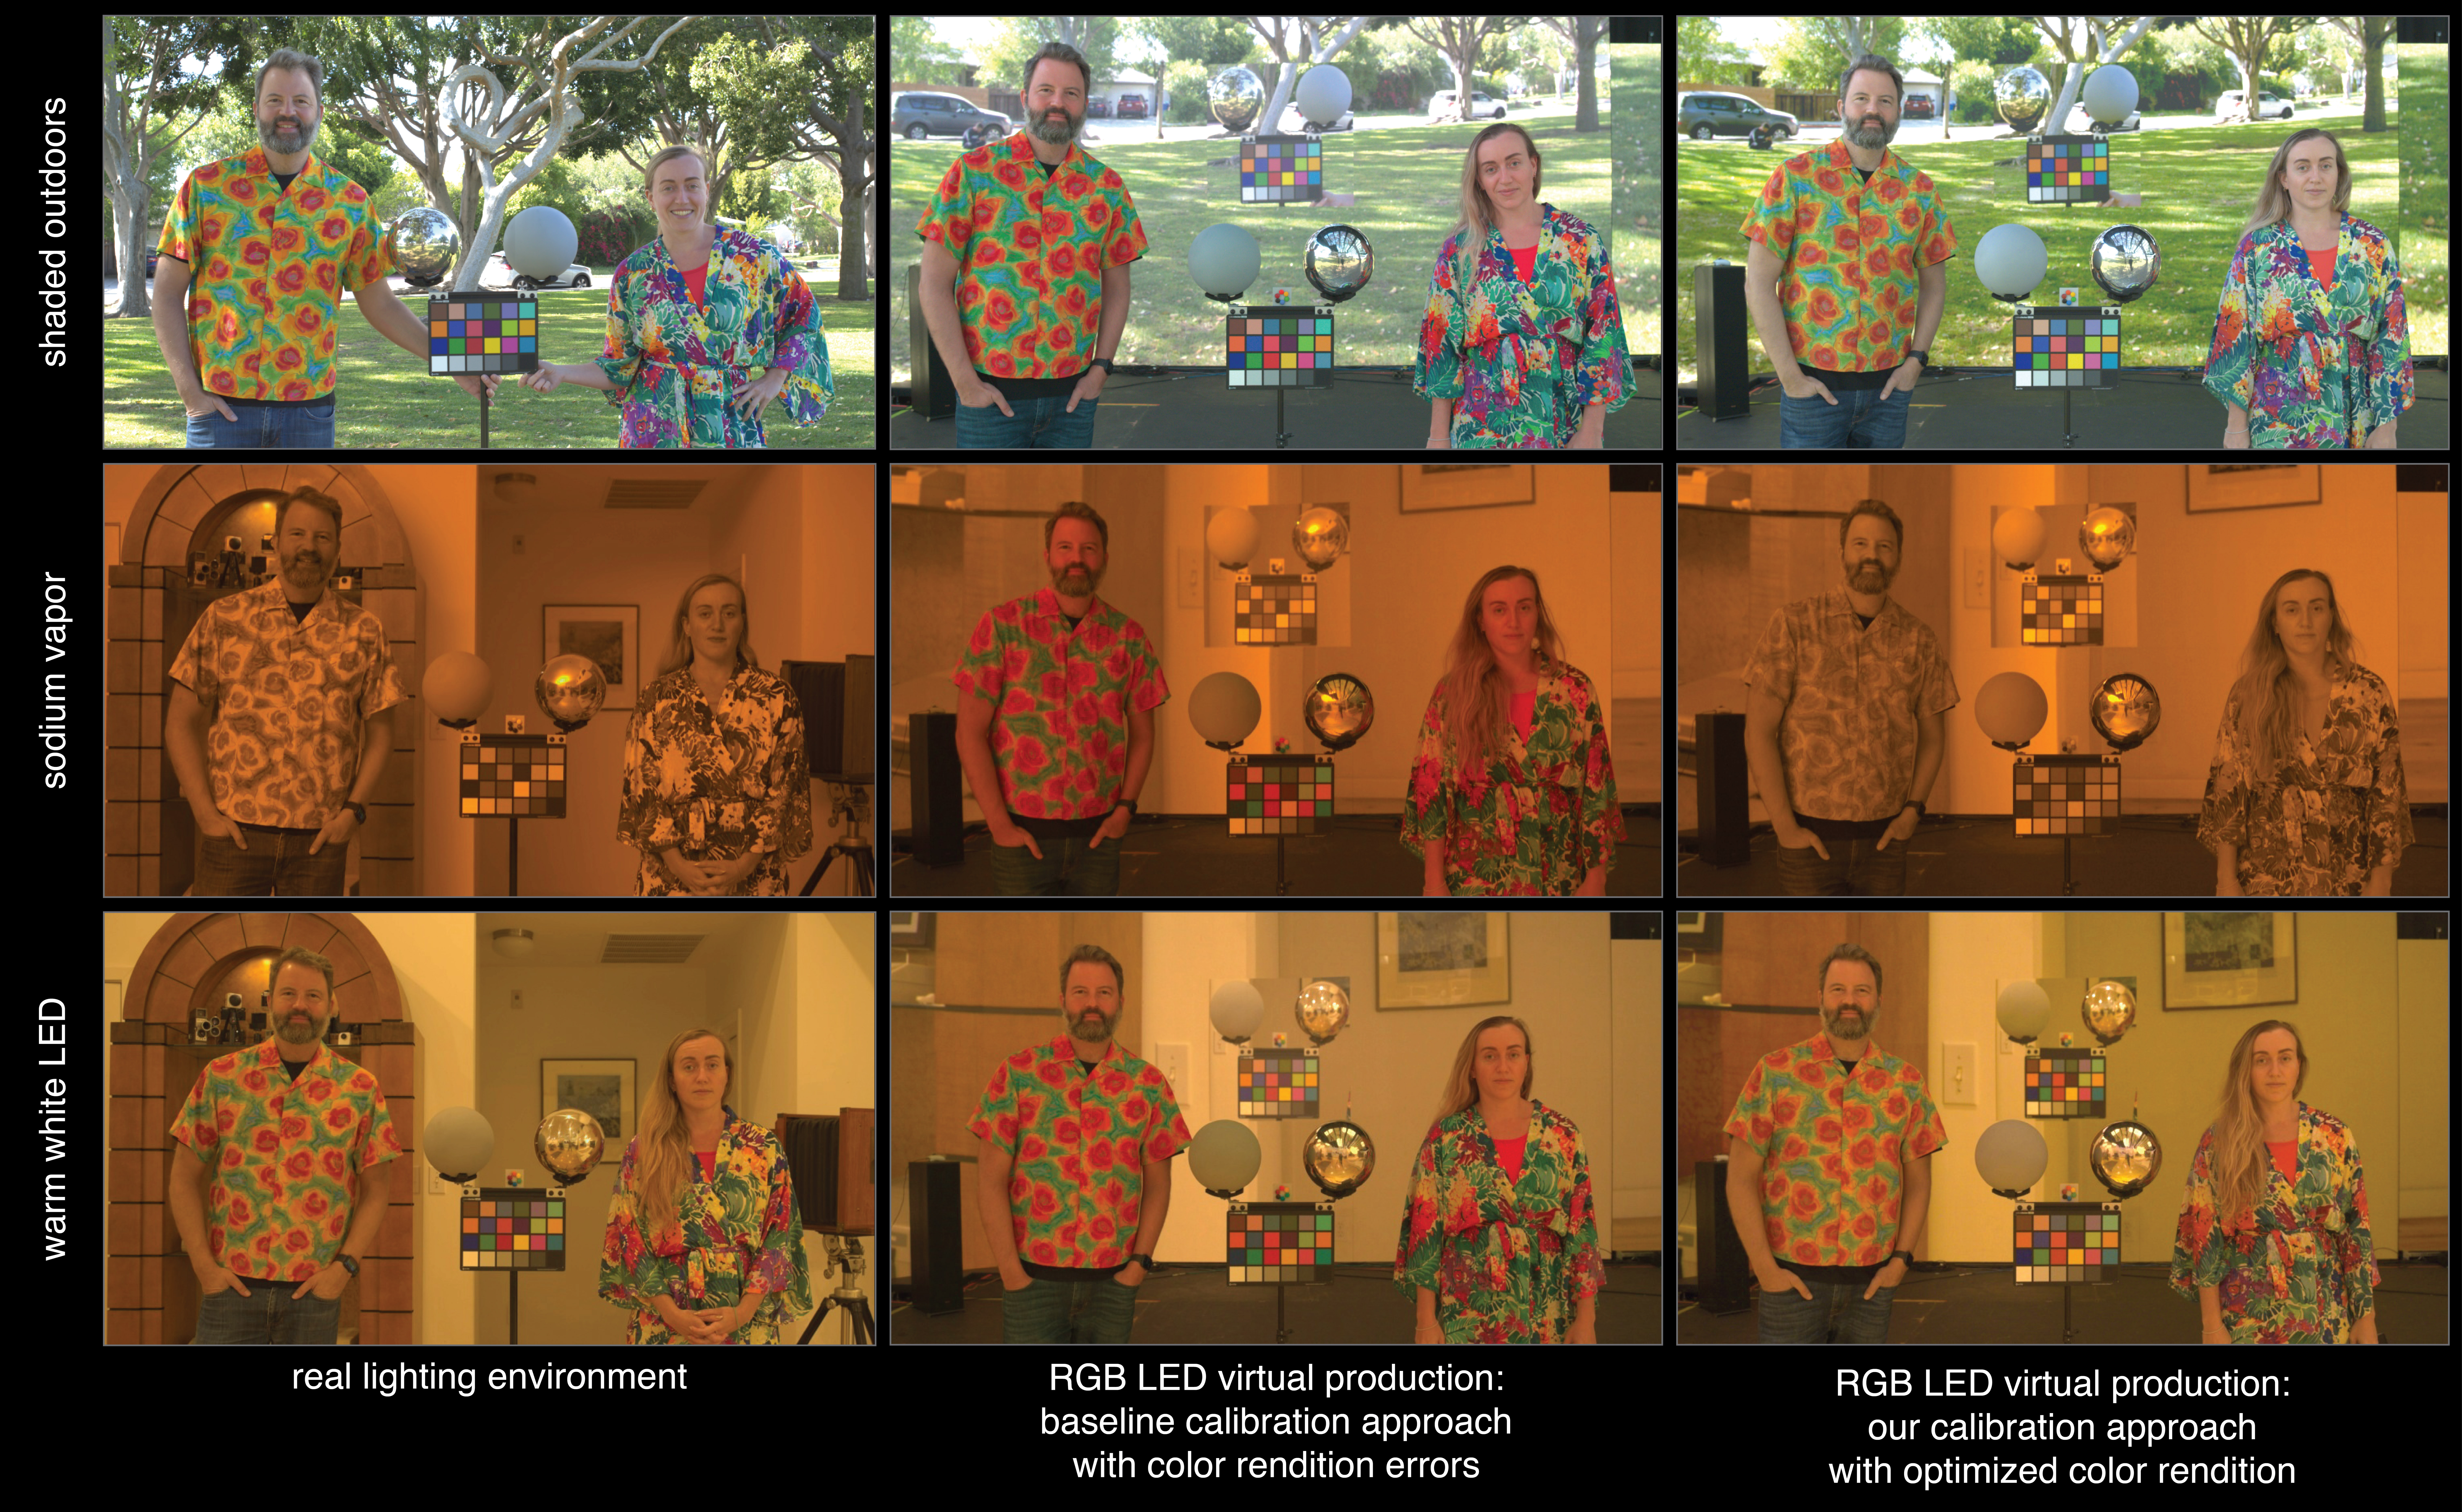 Jointly Optimizing Color Rendition and In-Camera Backgrounds in an RGB Virtual Production Stage